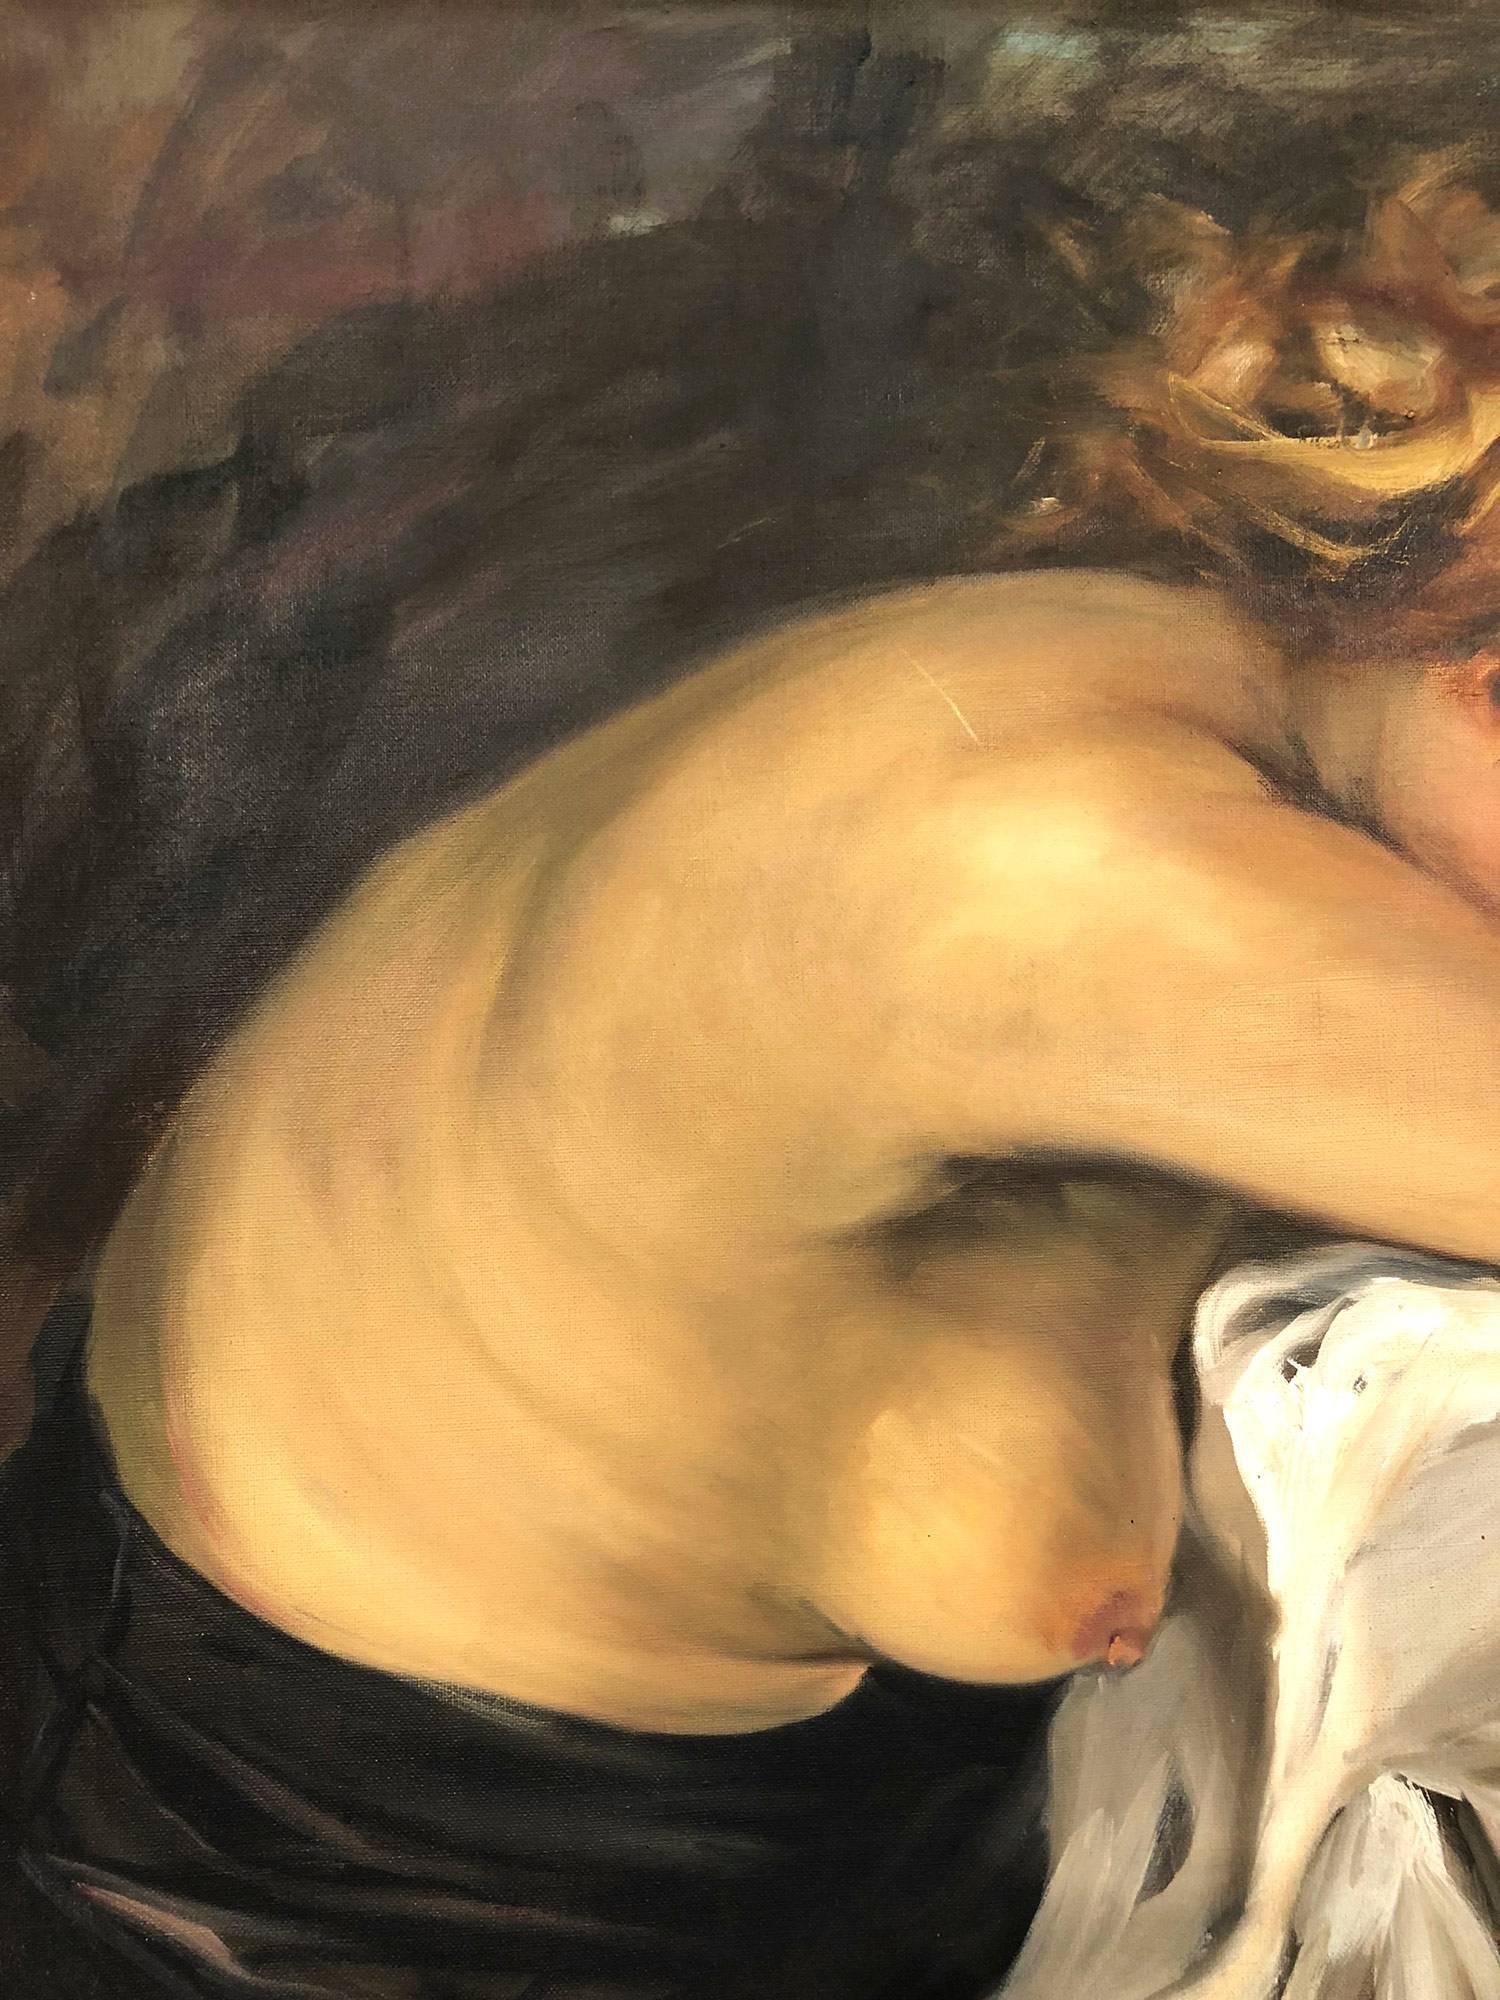 This is a wonderful example of Italian Artist Antonio Privitera's dramatic Nude portraits. The artist was truly a master of capturing the energy and the emotion of his subjects effortlessly. A striking piece, with expressed lust and beauty as the